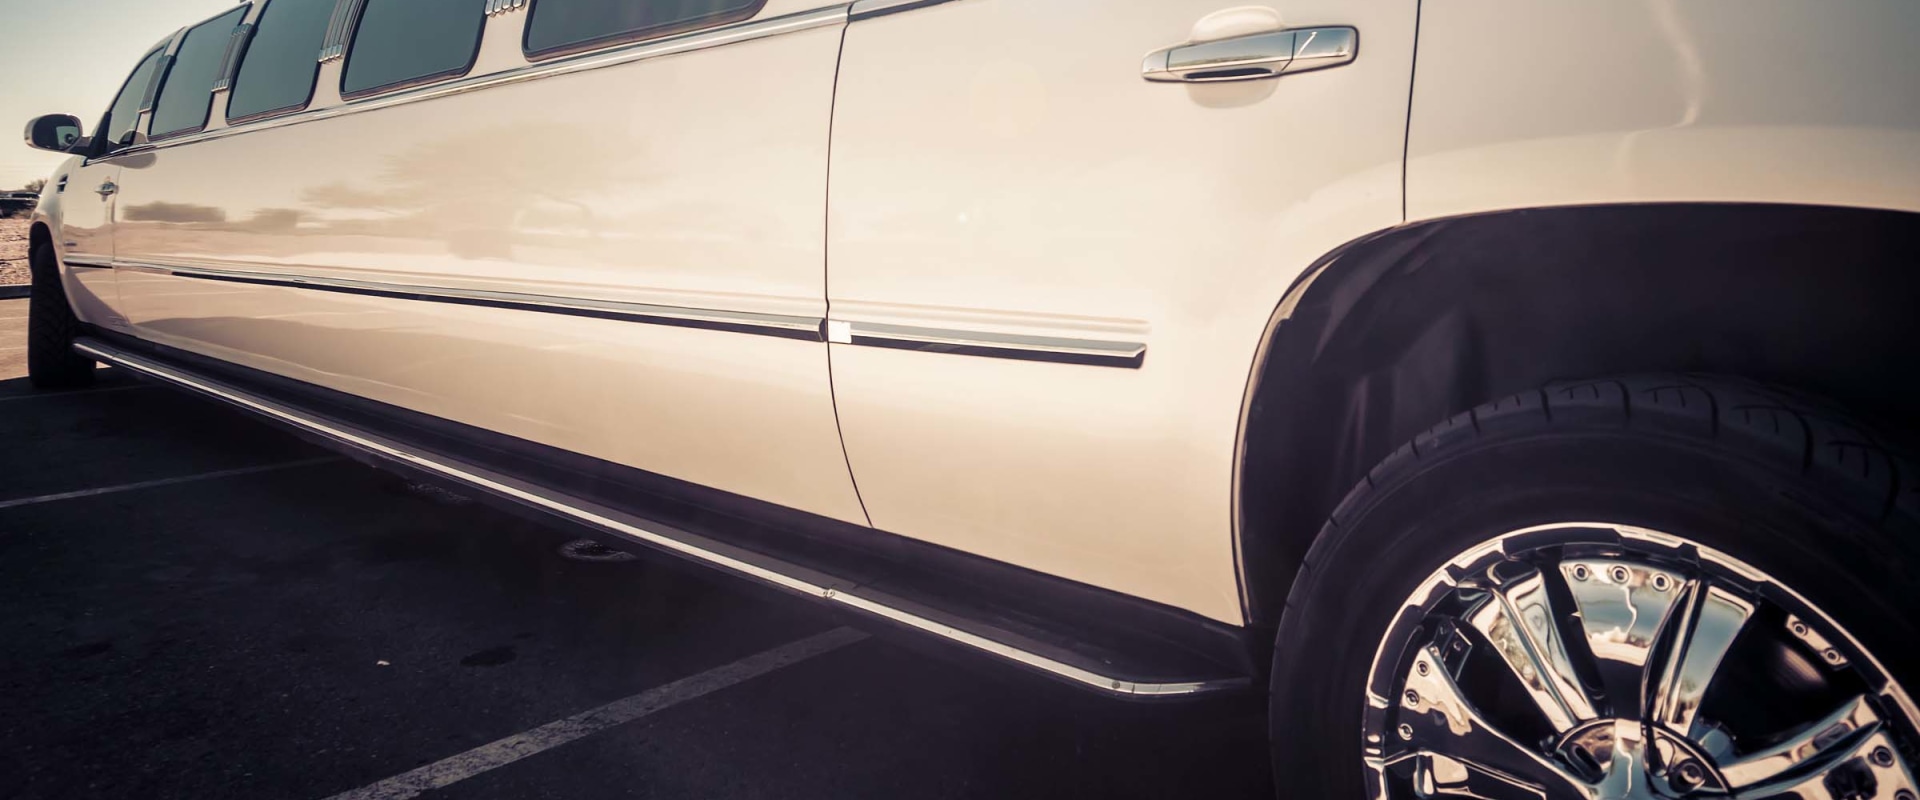 The Benefits of Hiring a Limousine